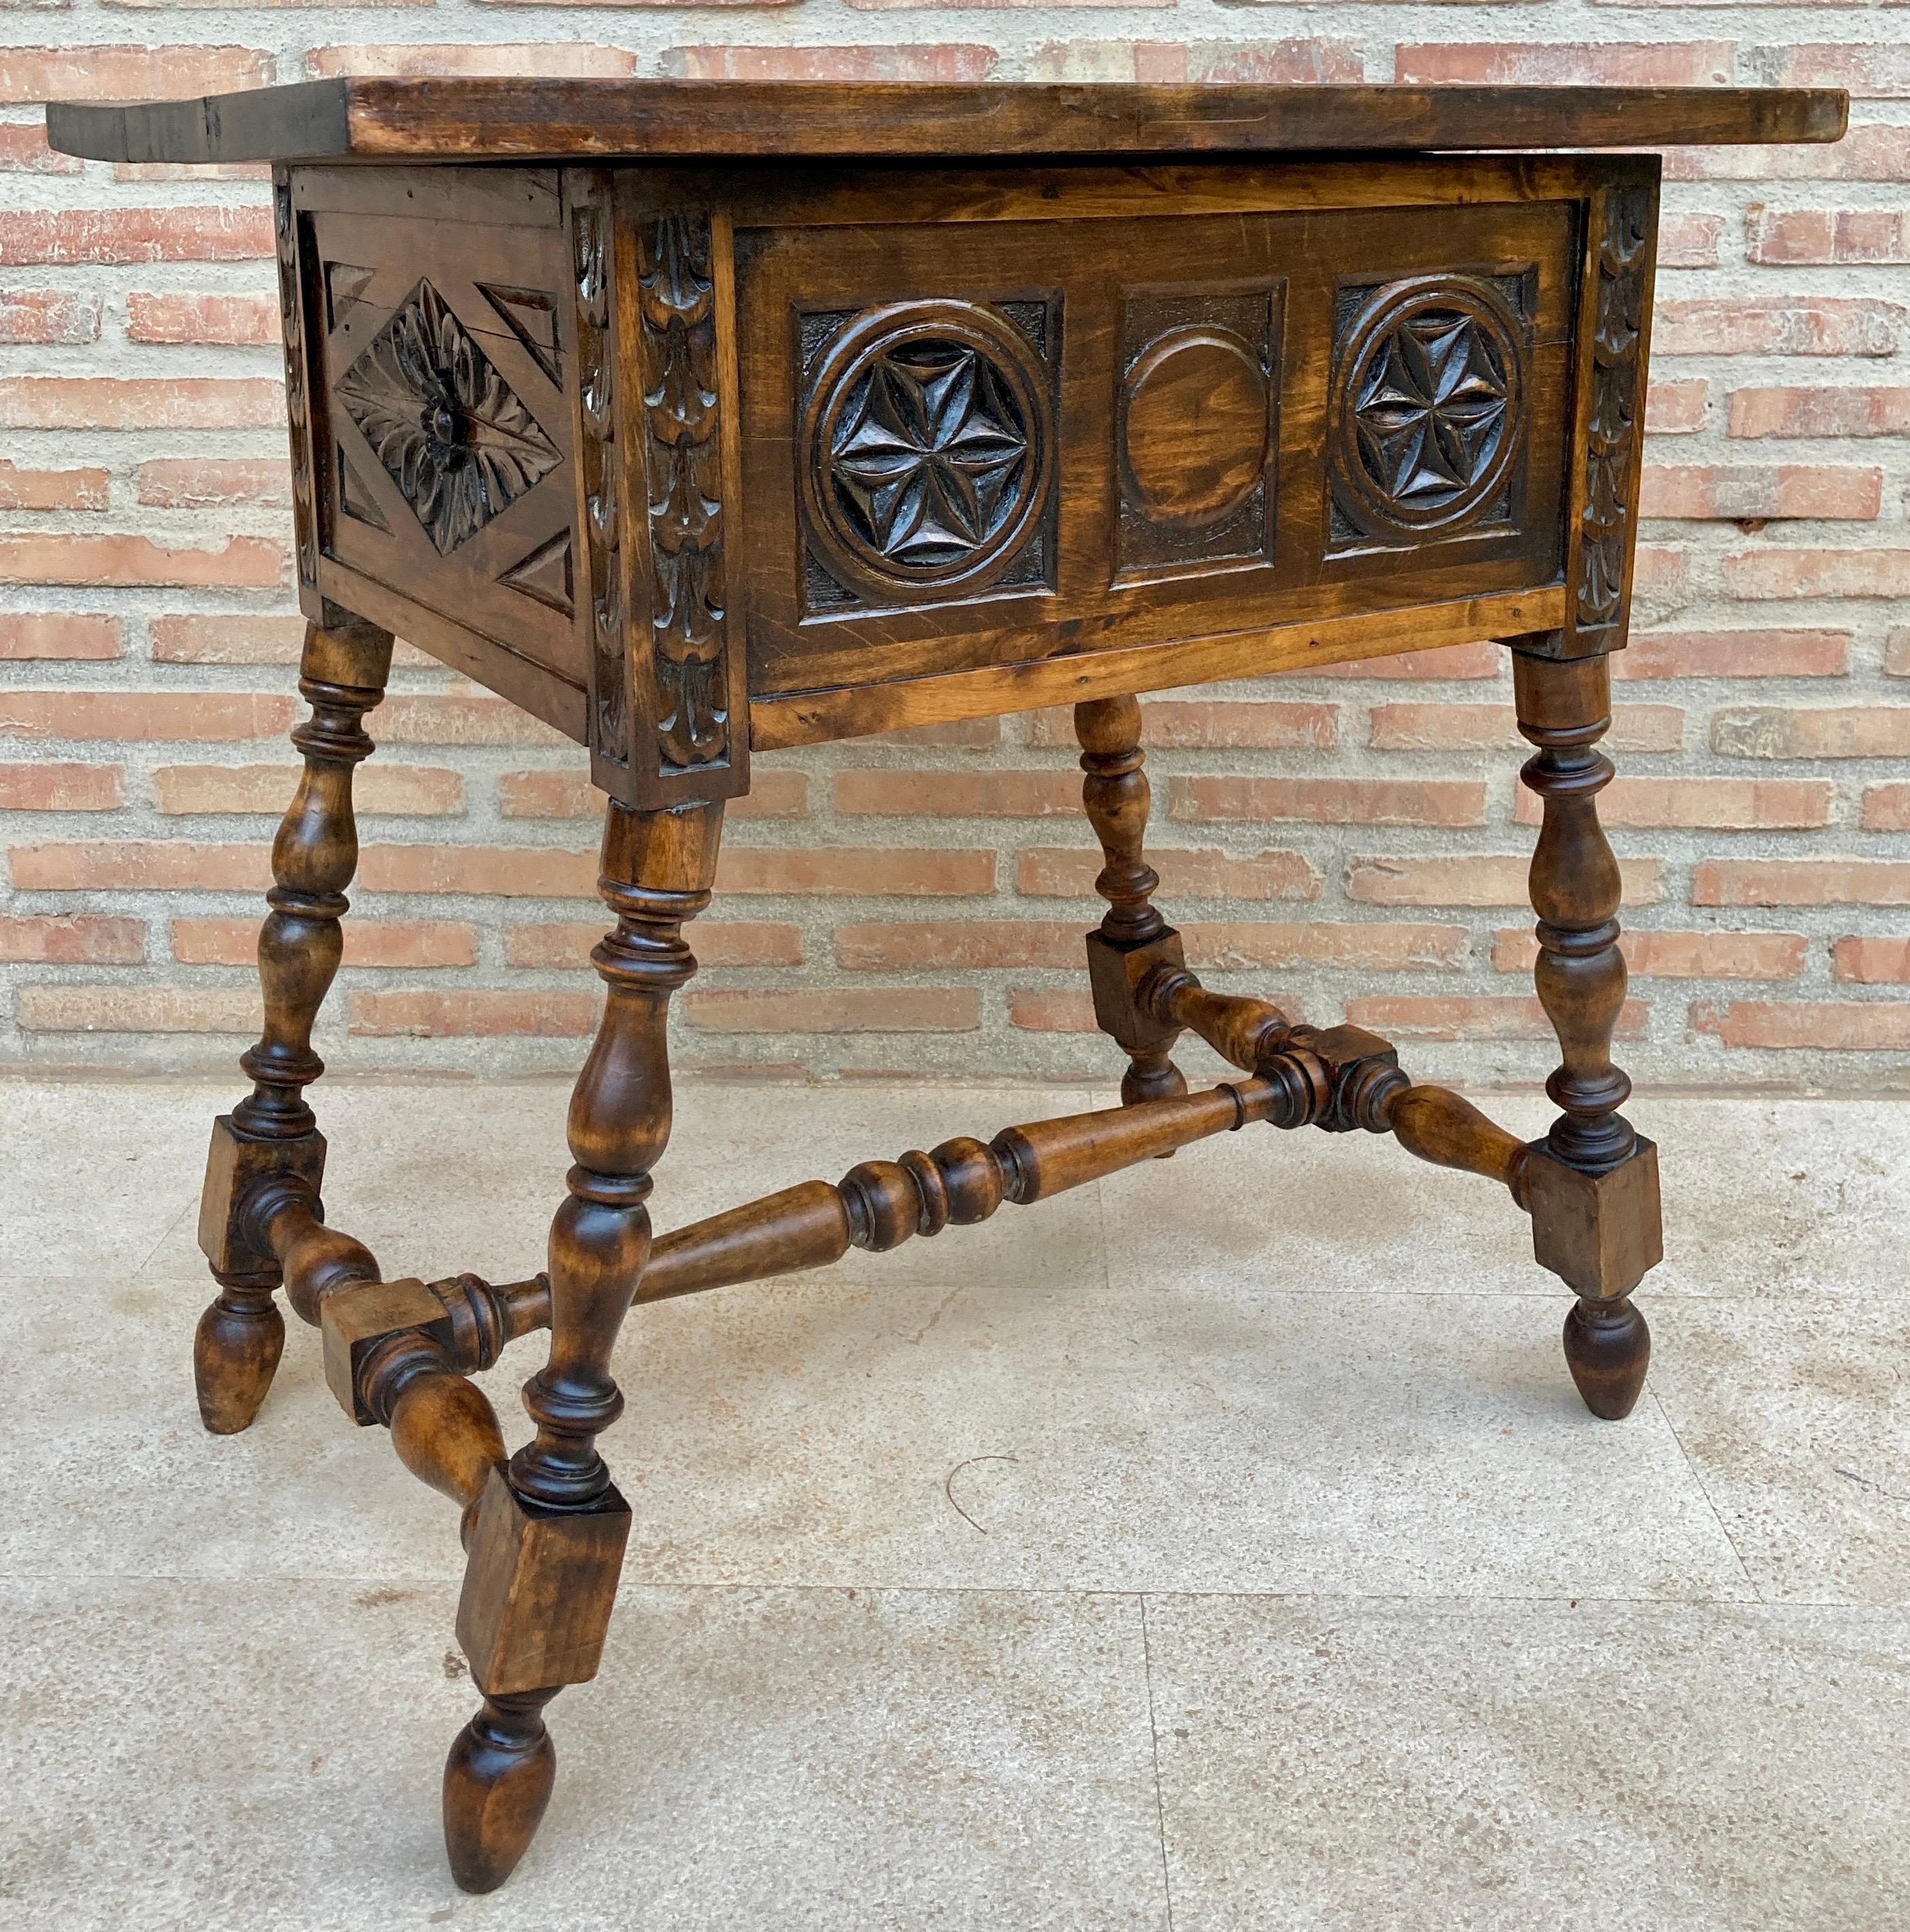 Beautiful walnut desk or side table from the 19th century Spanish Baroque with carved structure, solomonic legs and one drawer.
Its exquisite style will give a special touch to that room in the house where it is placed.
This vintage/antique item is